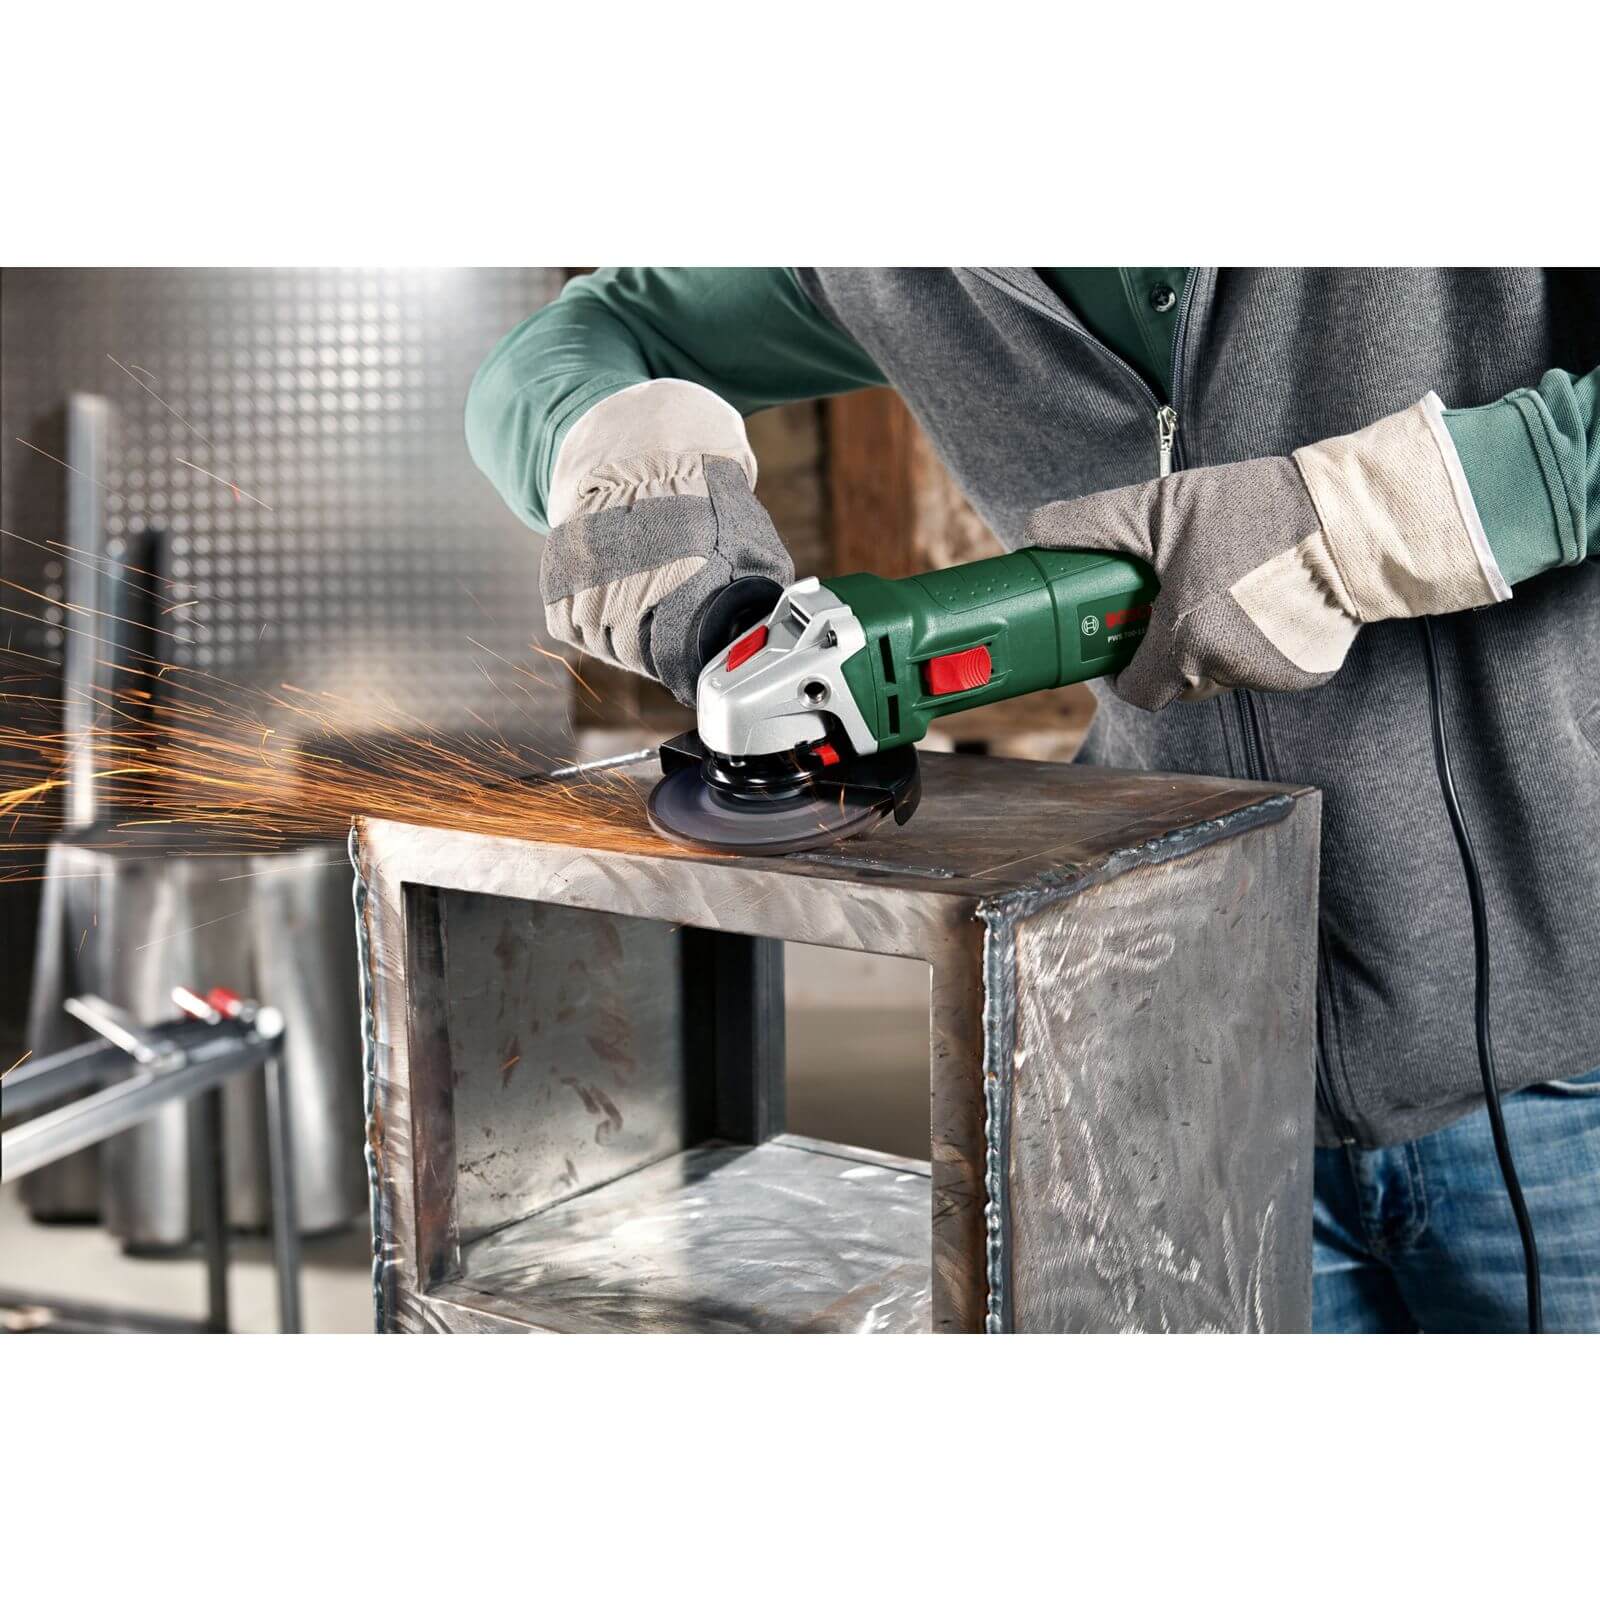 Photo of Bosch Pws 700-115 Electric 700w Angle Grinder